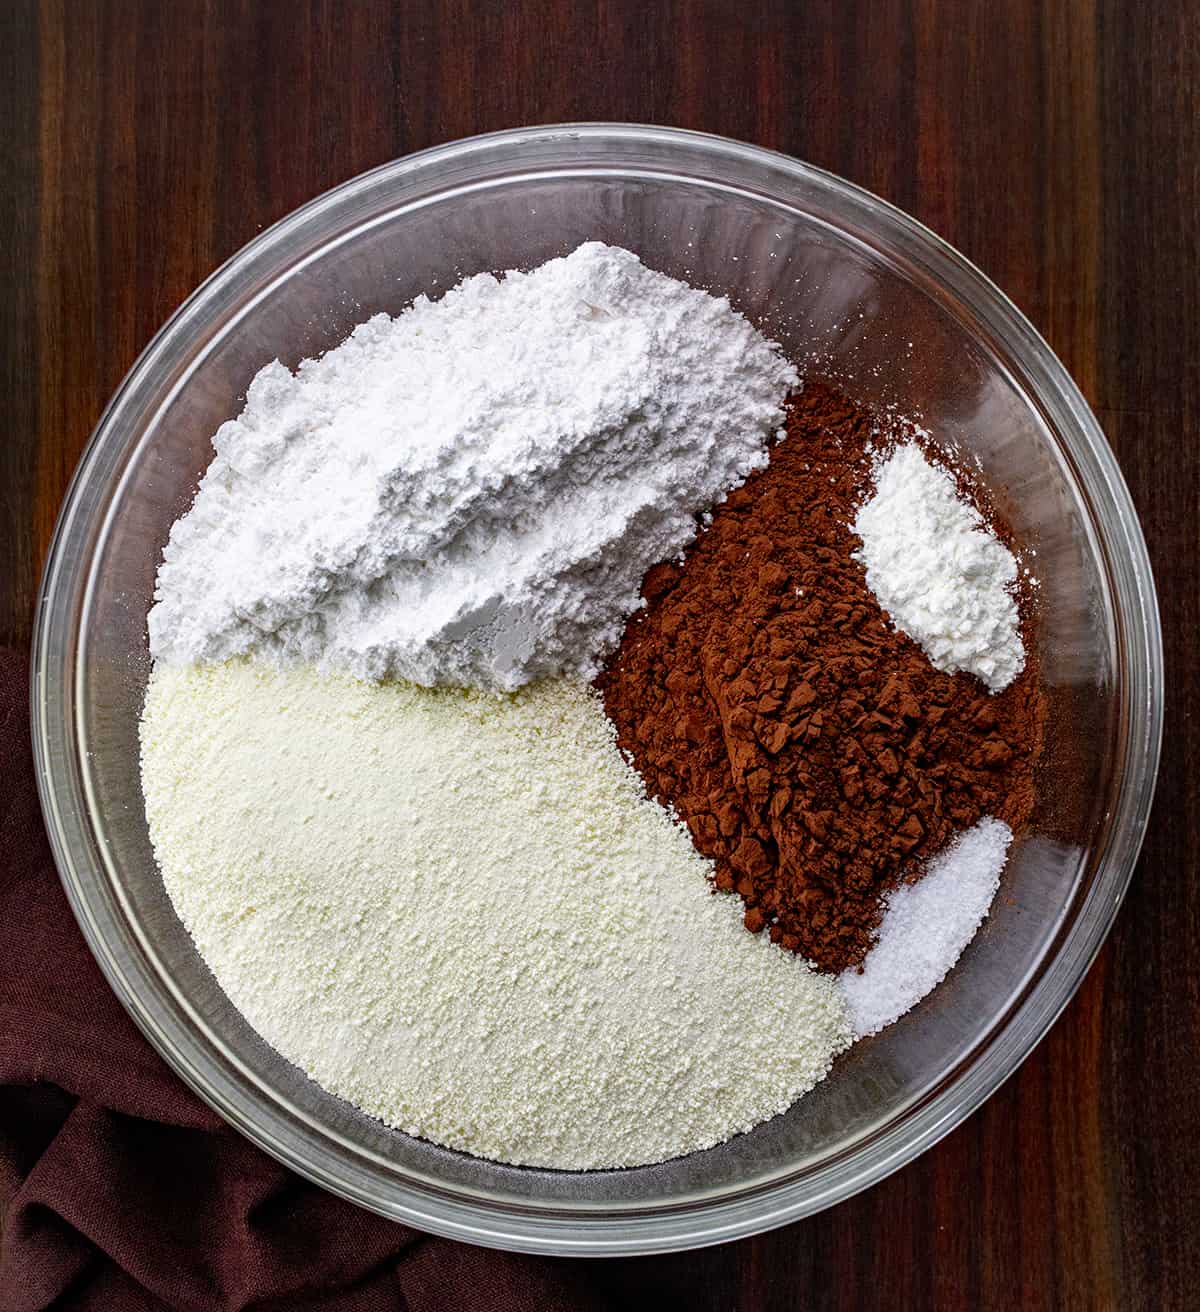 Ingredients for making homemade hot cocoa mix in a bowl on a cutting board.